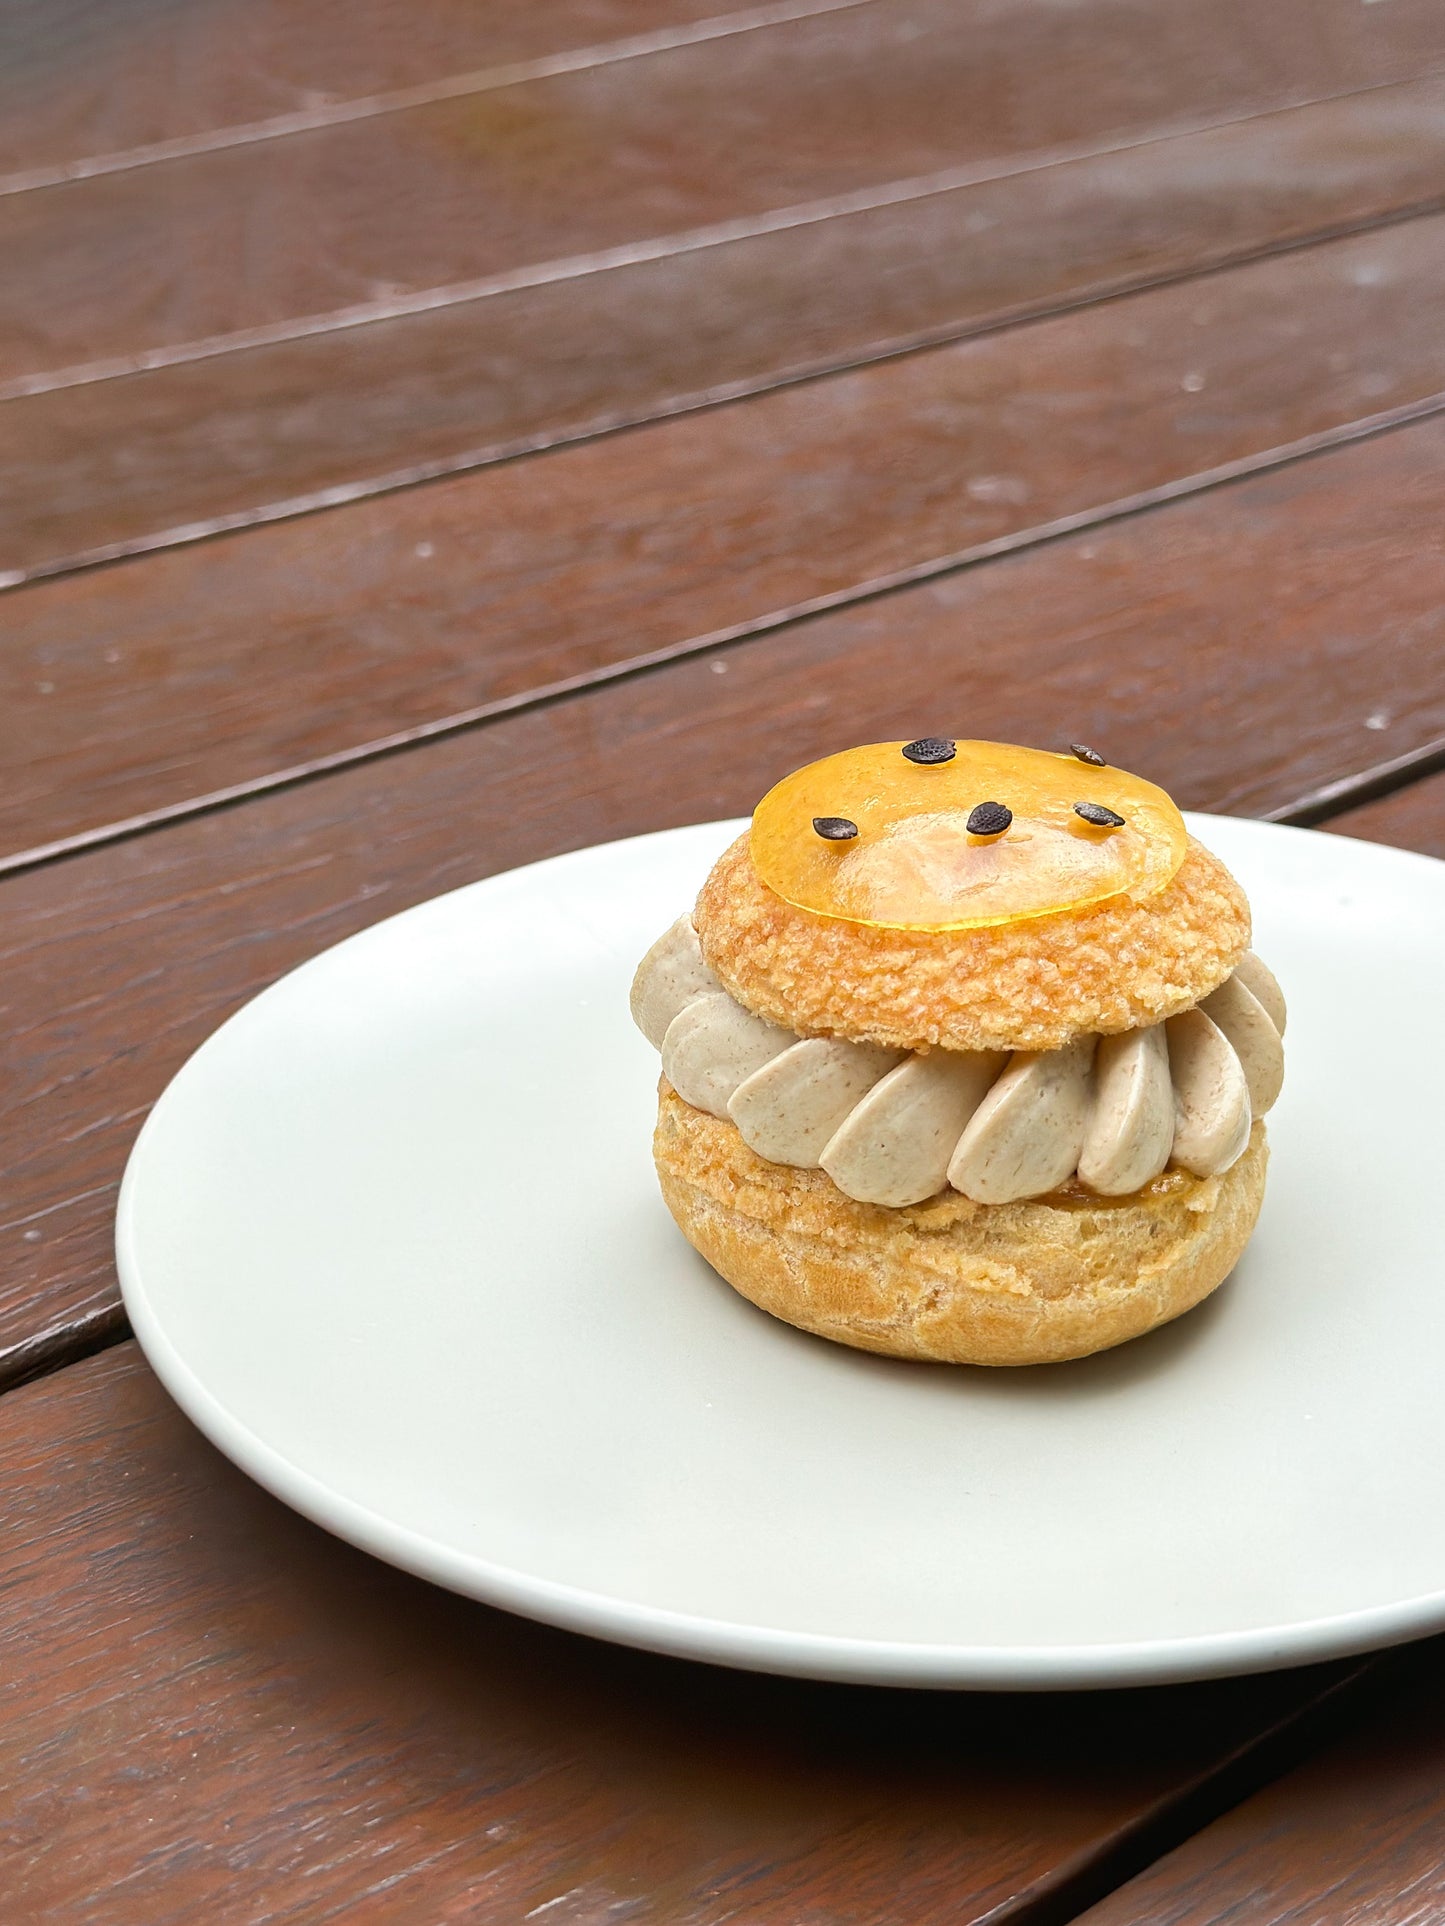 A close-up of a golden-brown choux pastry puff. The choux puff is sliced horizontally, revealing a filling of smooth banana cream and tangy passion fruit confit inside a mini choux. The top of the choux puff is garnished with a spoonful of sweet banana compote.